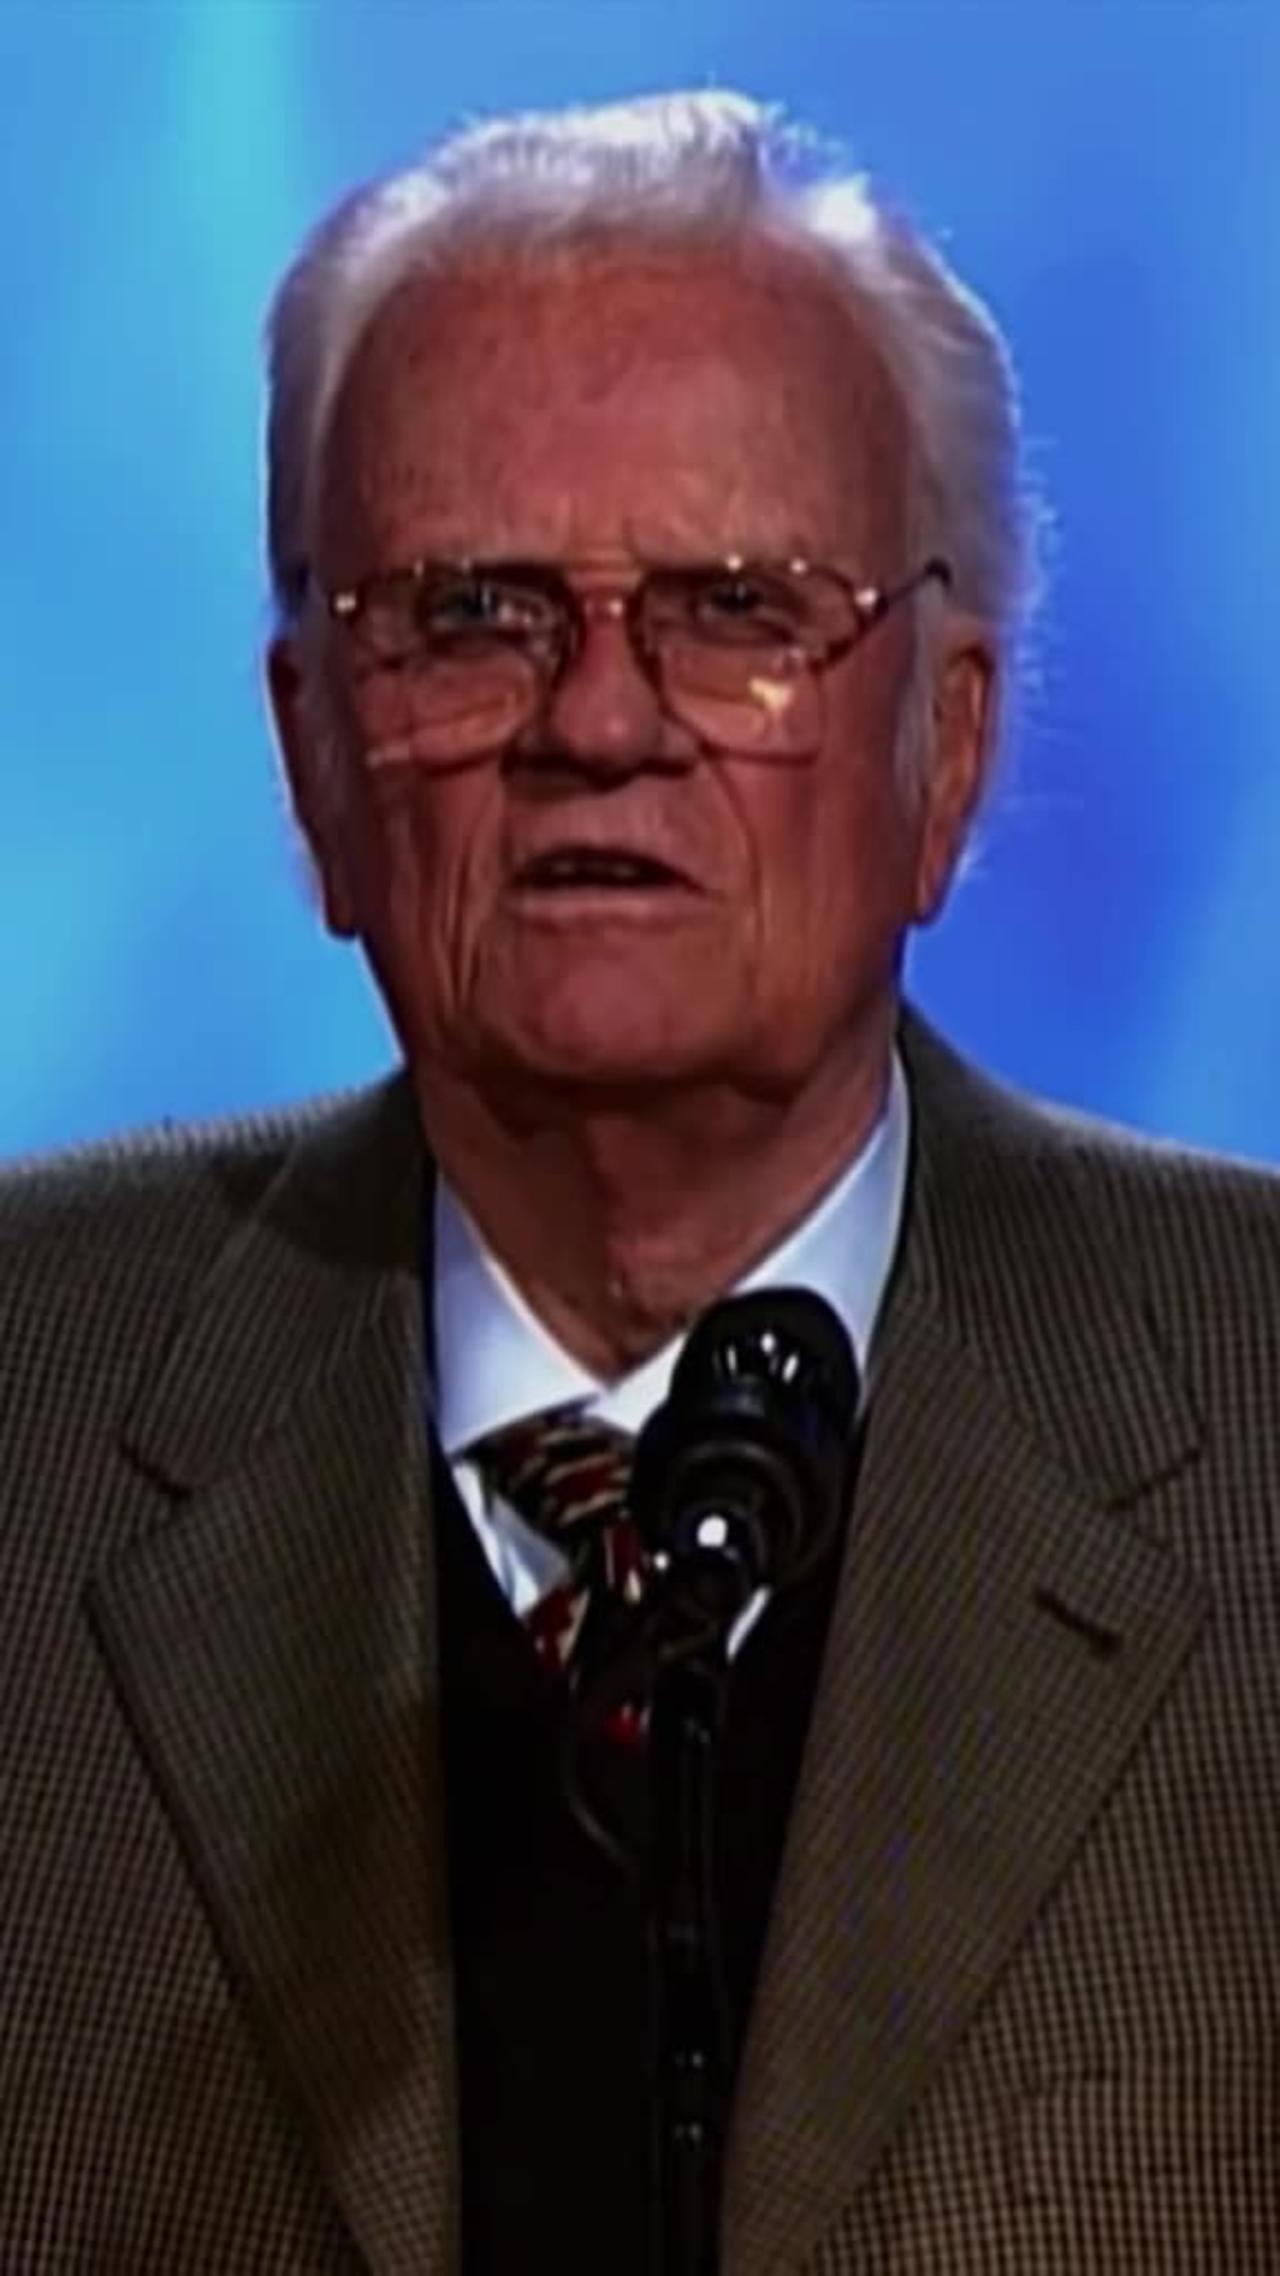 God loves you no matter what by Billy Graham